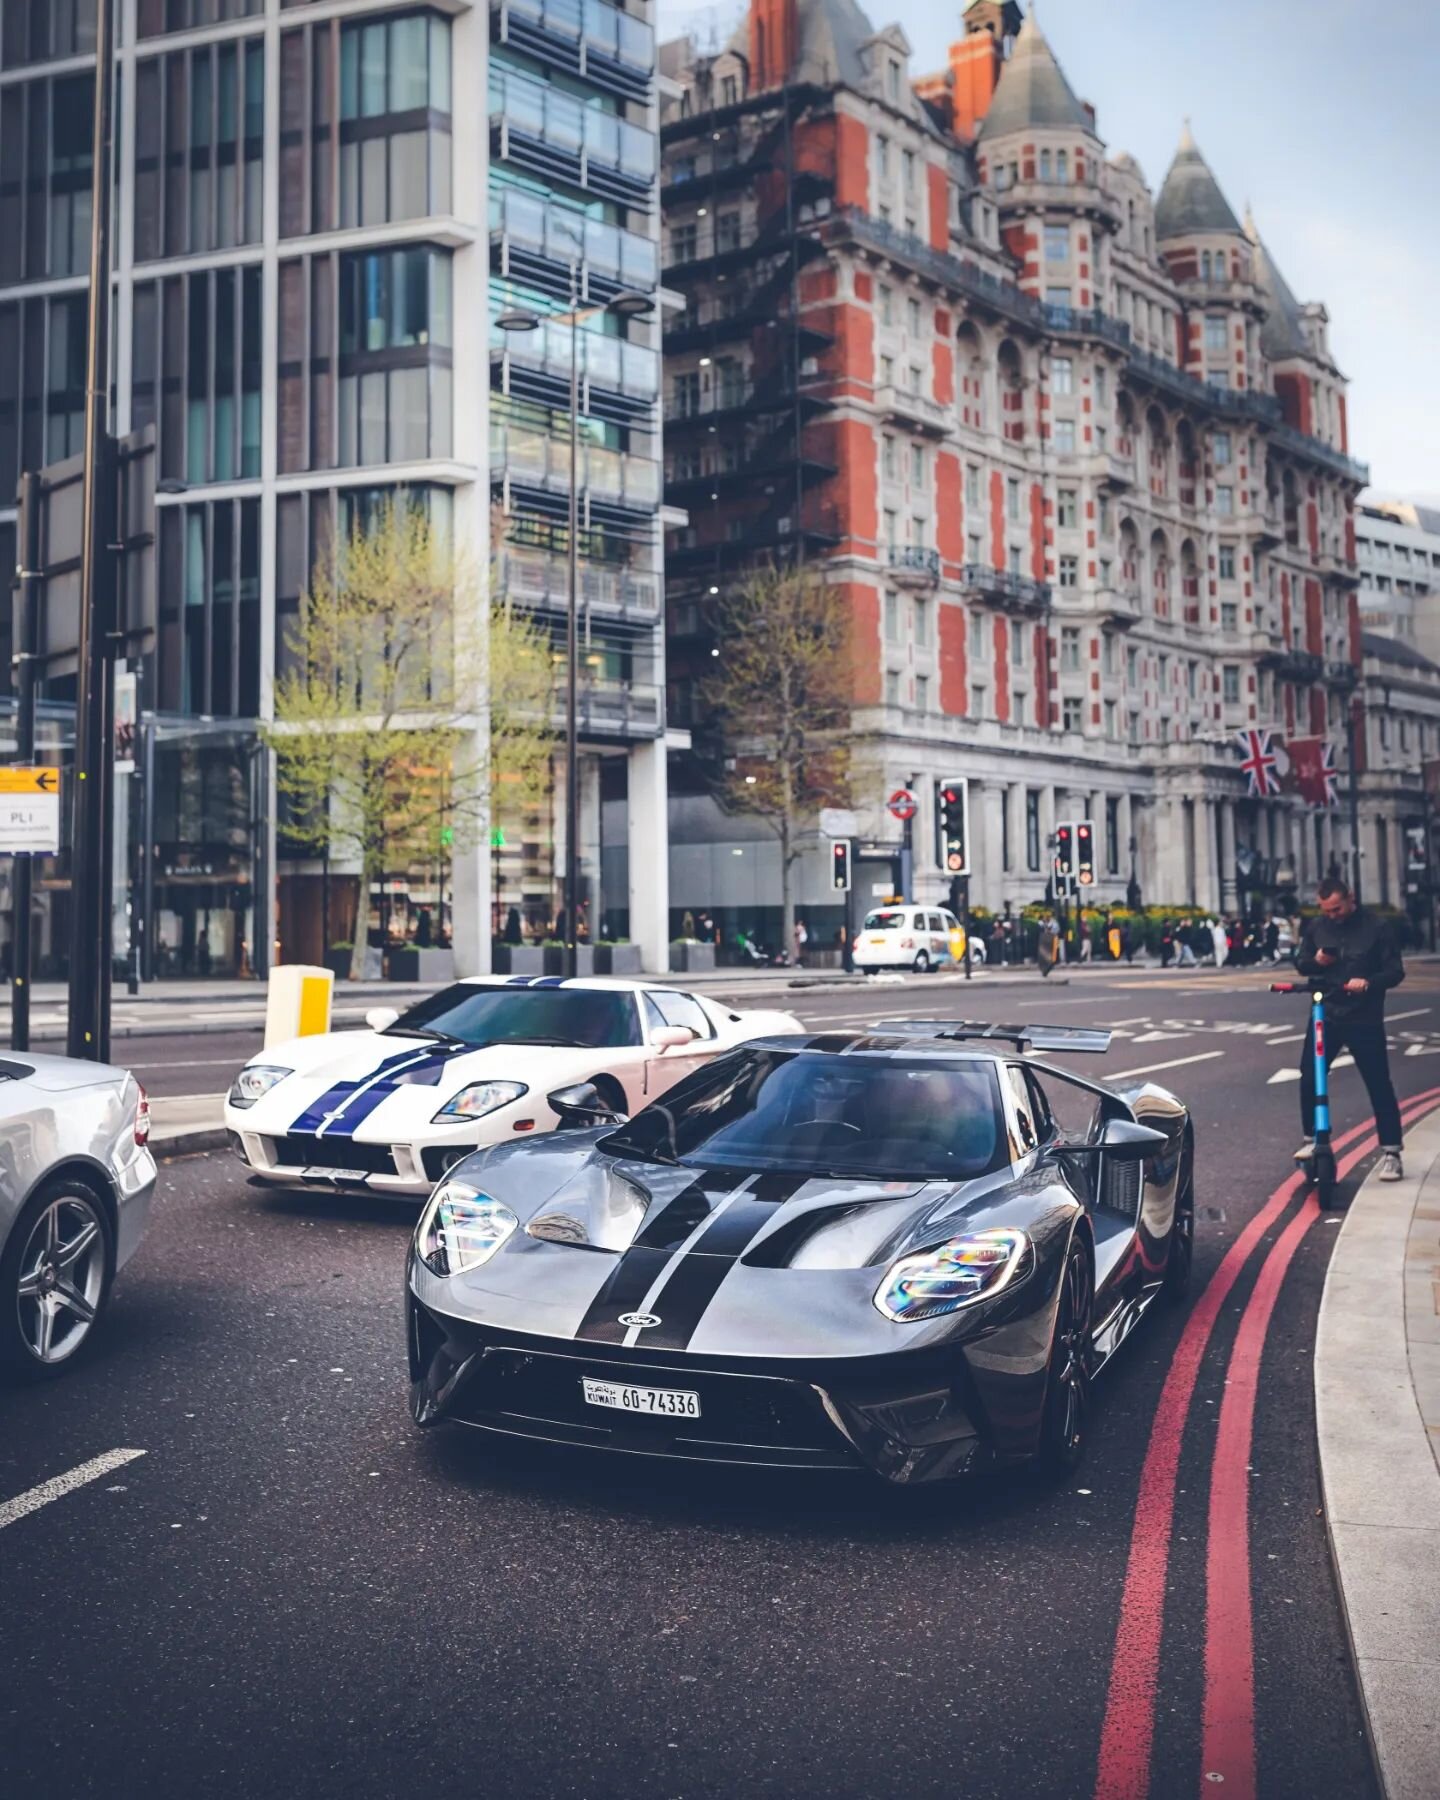 One of my adventures last month took me once again to the capital. It would be pretty good to do this more often but train tickets to London from home ain't cheap. So I have to take as much in as possible! #FordGT #Ford #Supercars #London #Supercarso